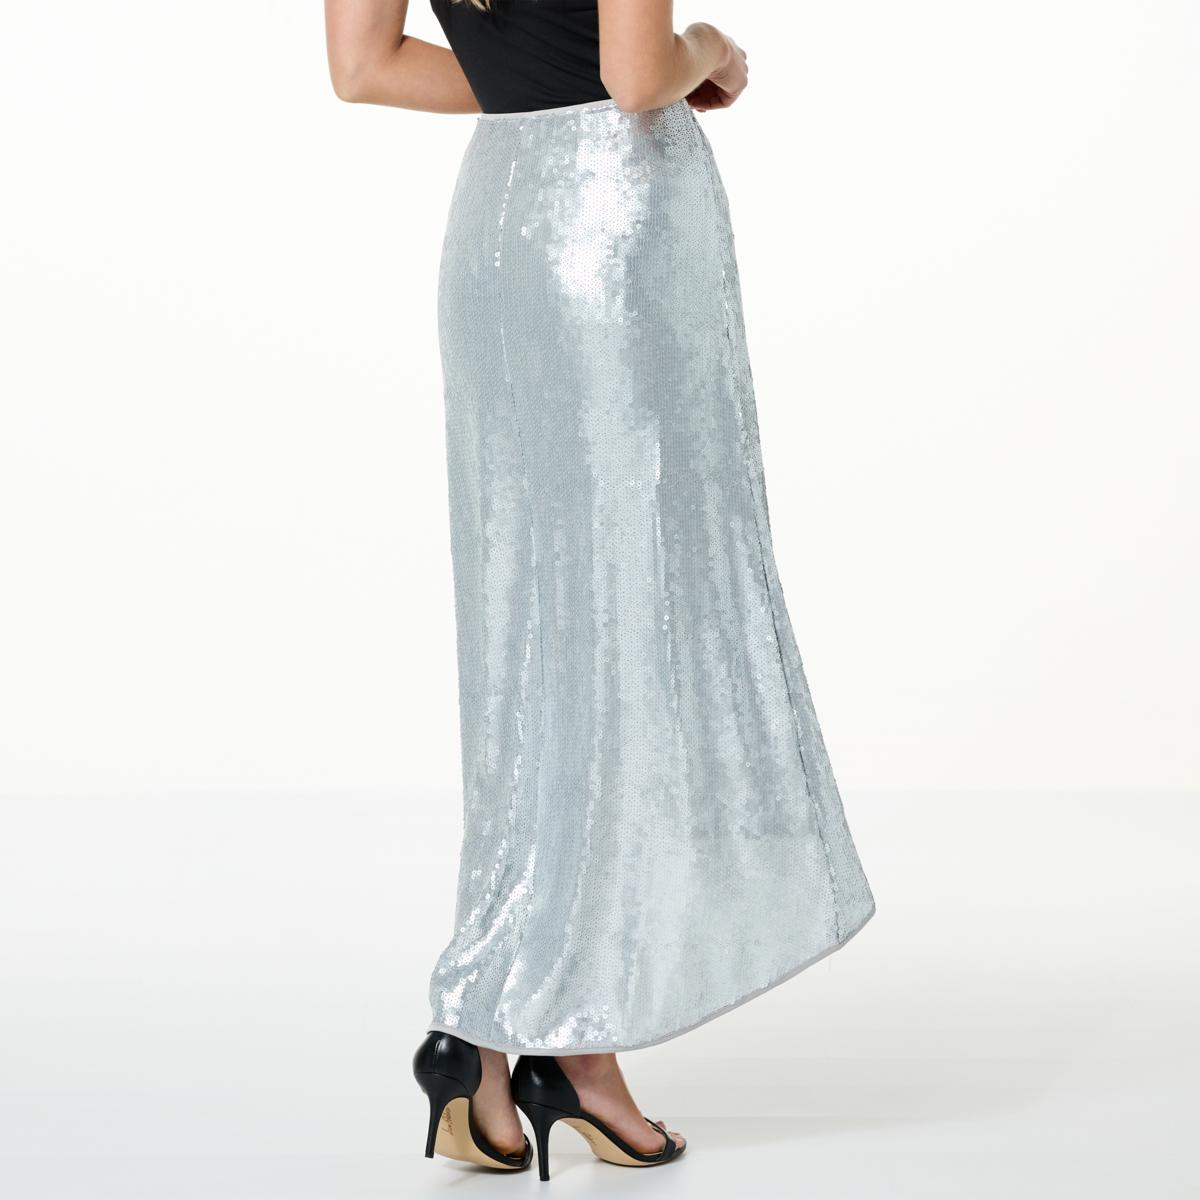 C Wonder by Christian Siriano Flared Hi-Low Sequined Skirt